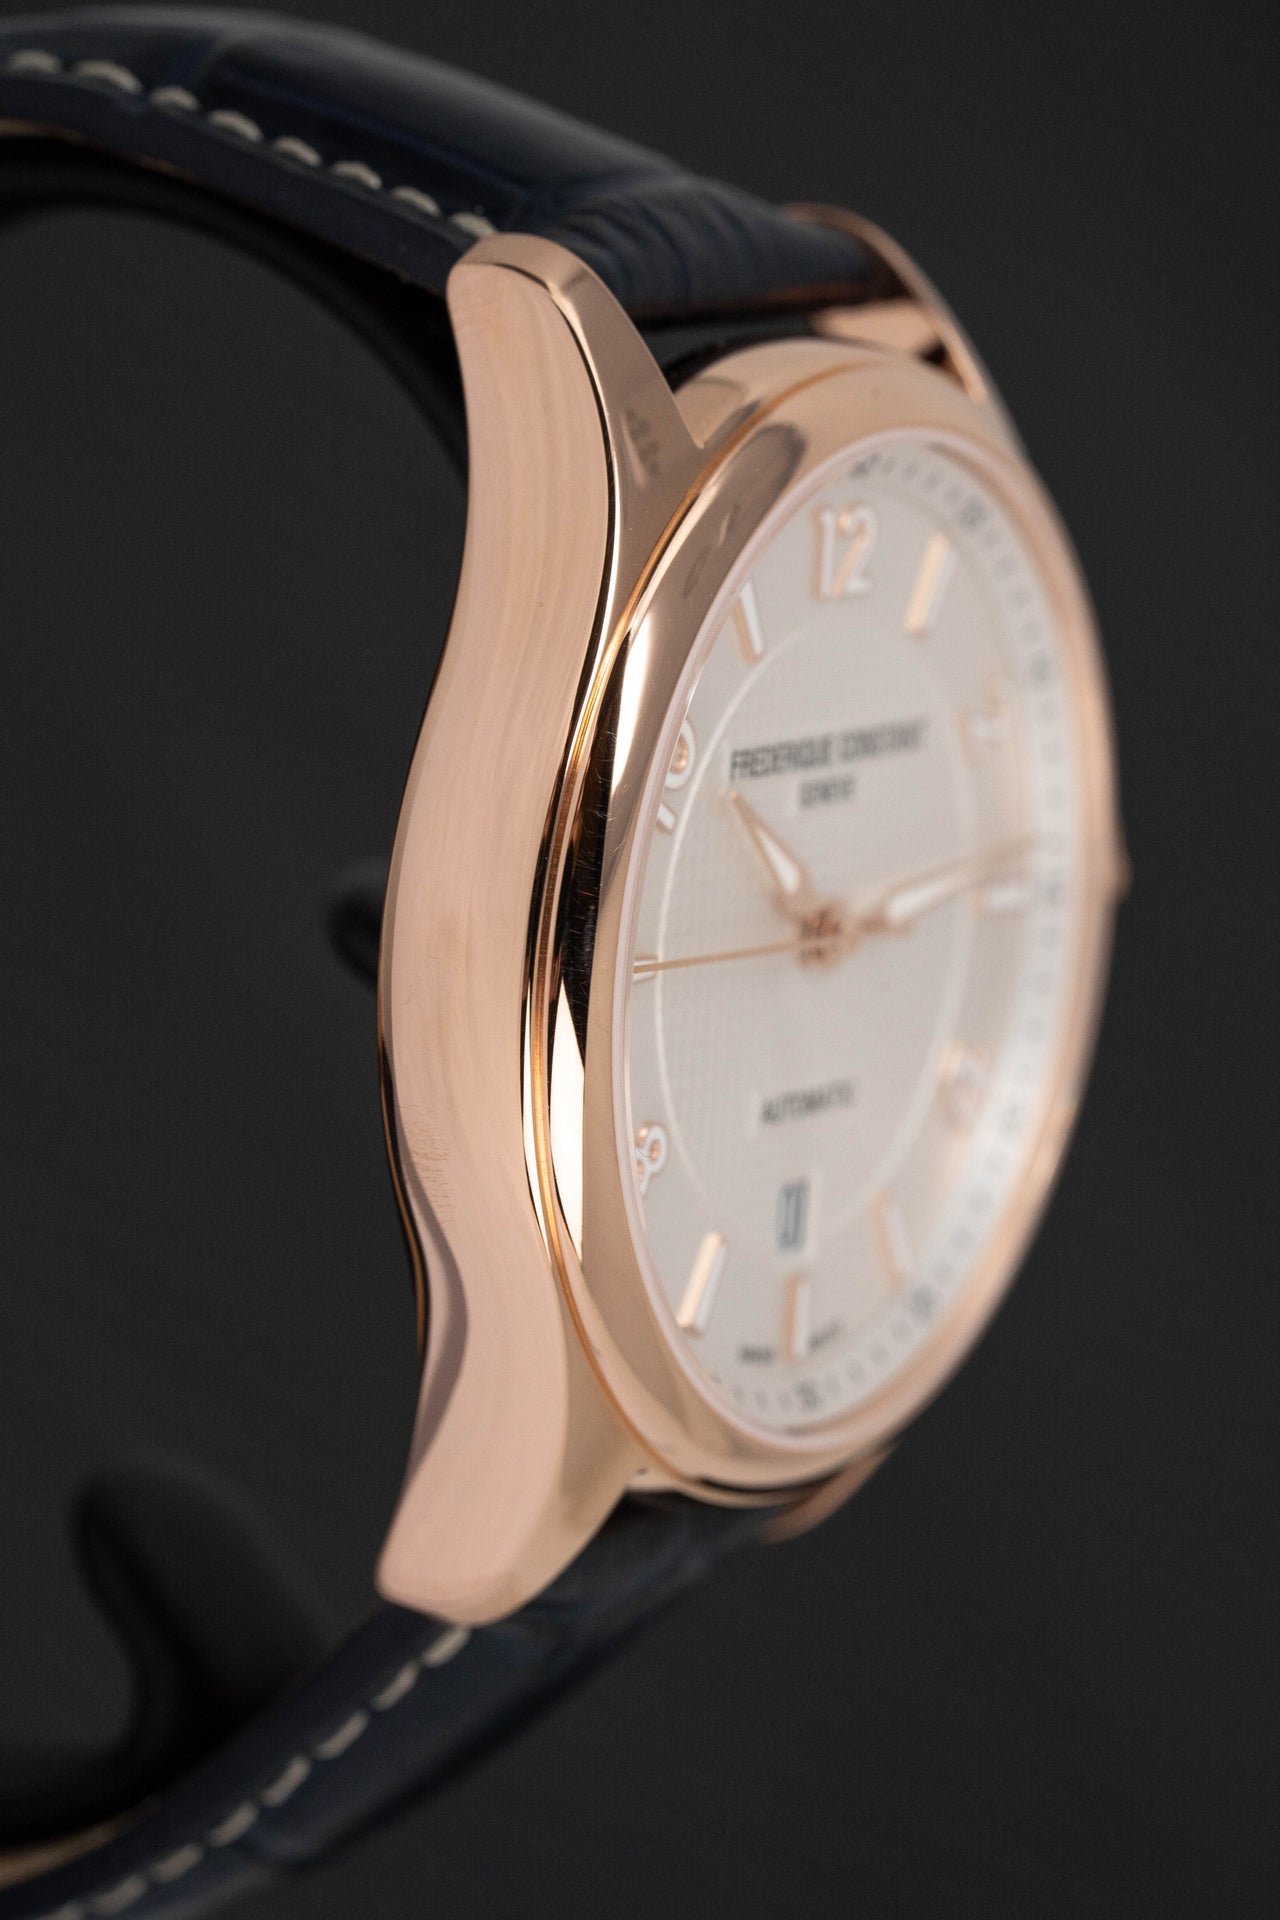 Frederique Constant Watch Automatic Runabout Limited Edition Rose Gold PVD FC-303RMS5B4